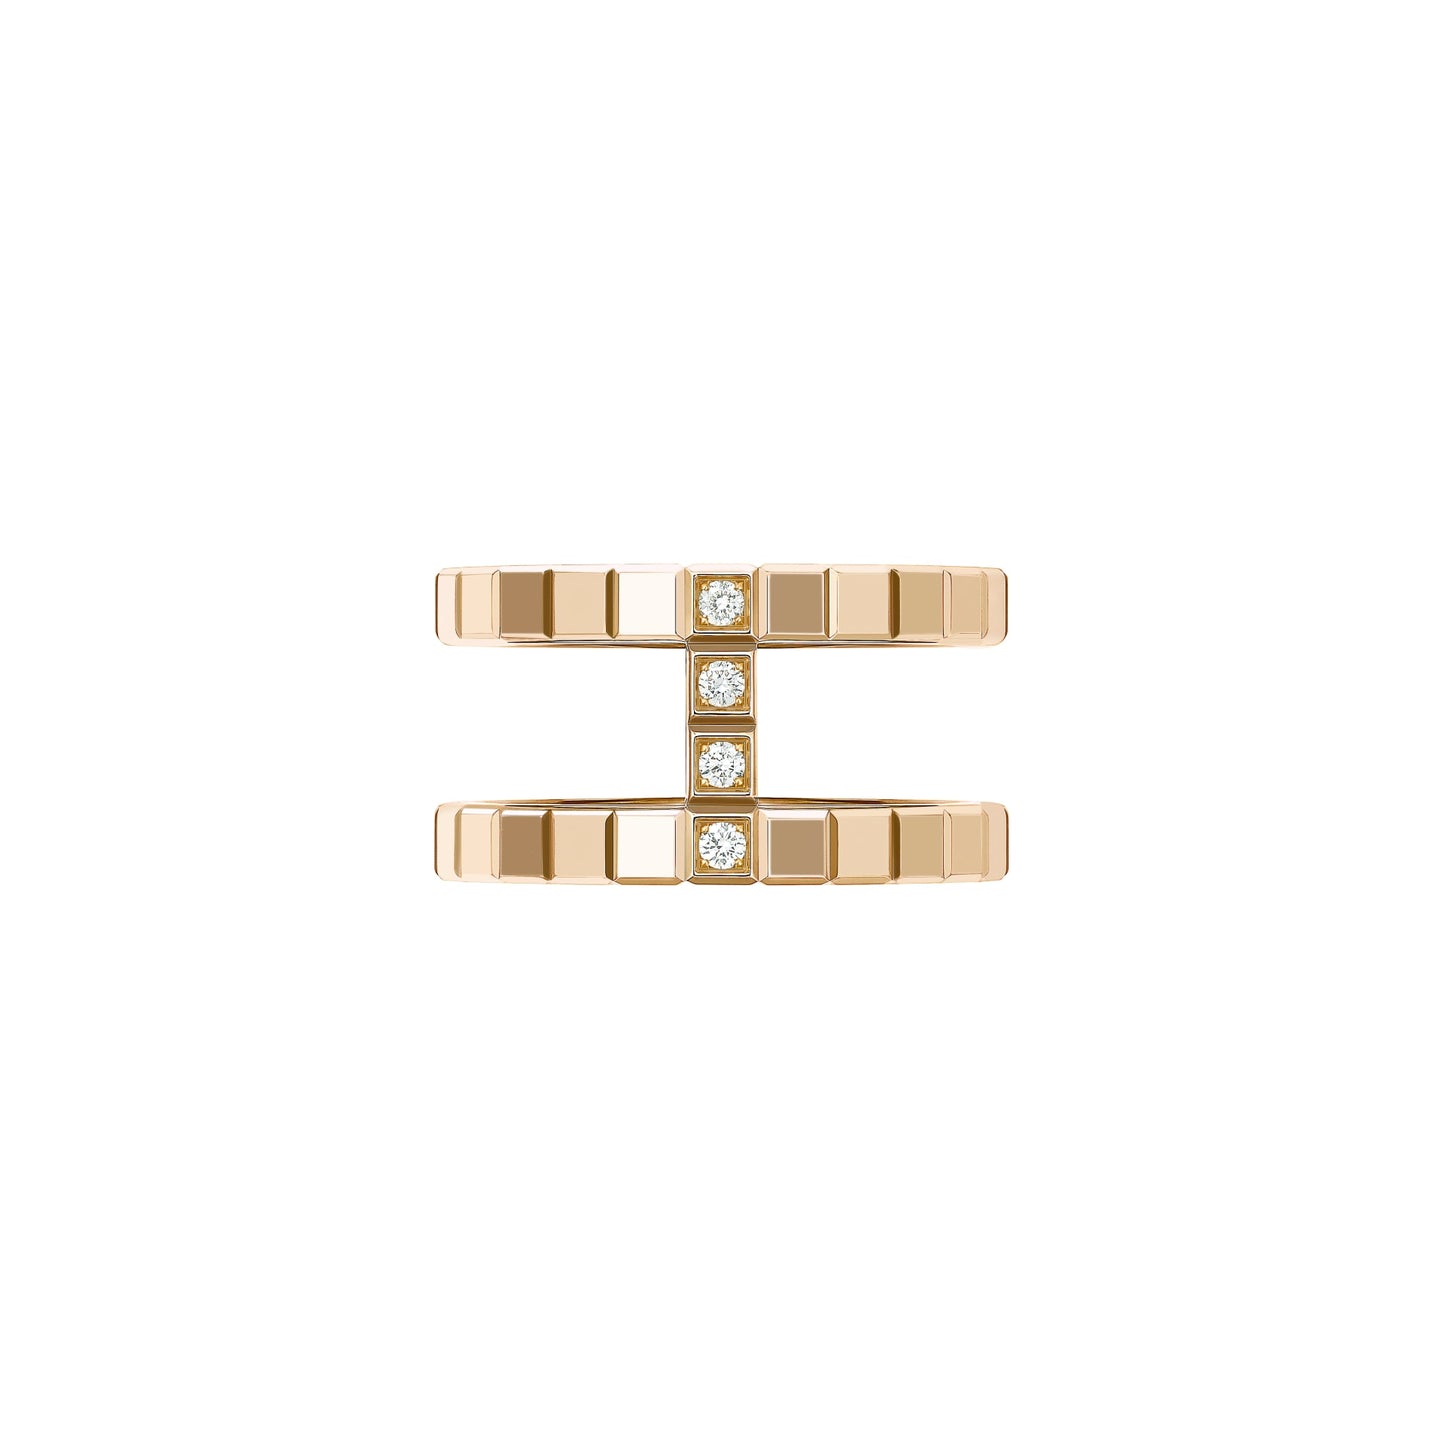 ICE CUBE RING, ETHICAL ROSE GOLD, DIAMONDS 827006-5010